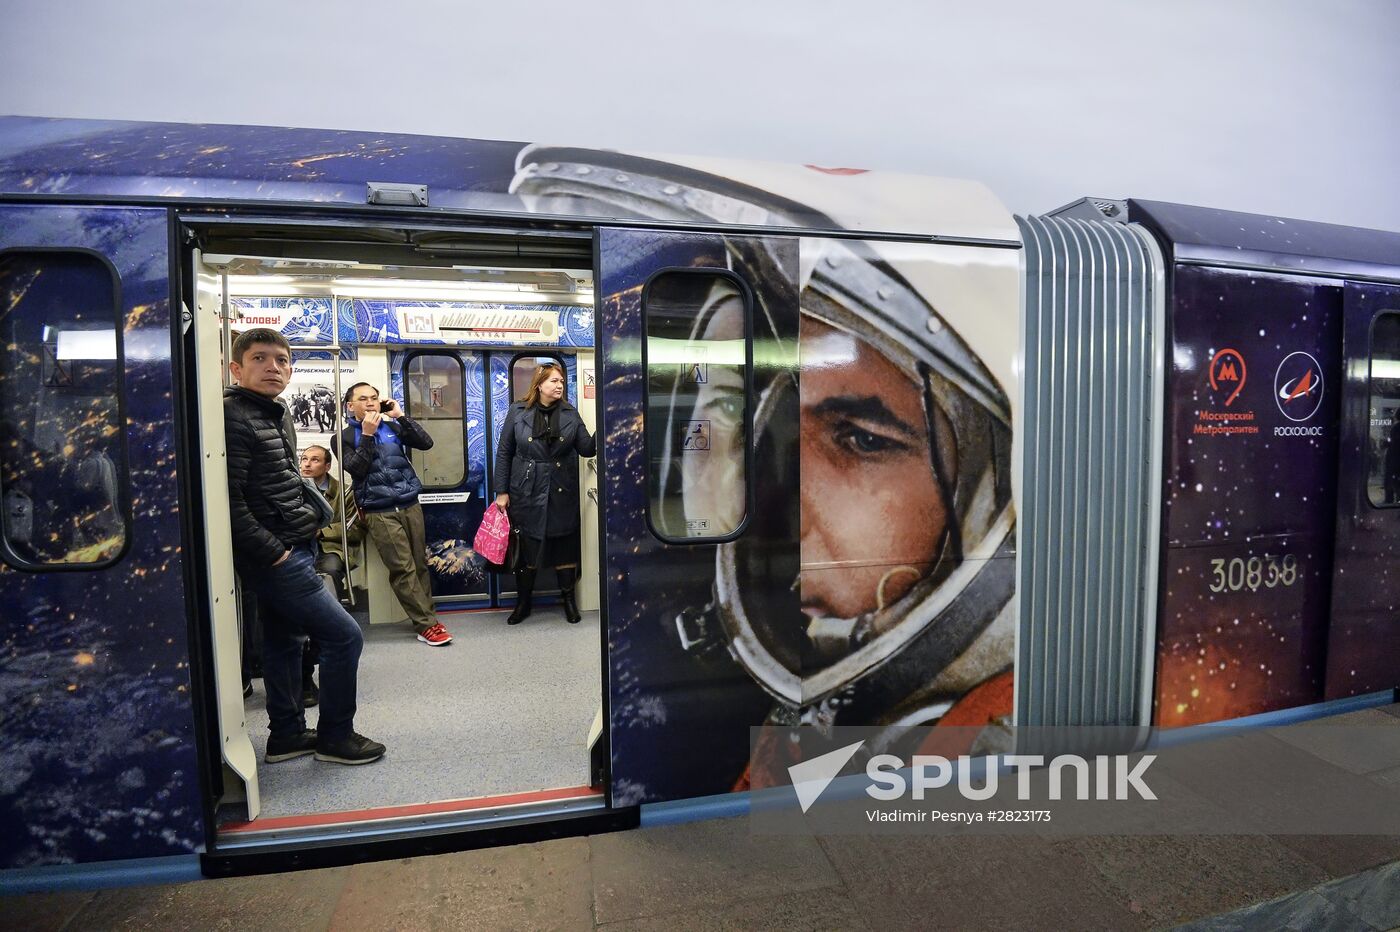 Thematic Moscow Metro train marking 55th anniversary of Yury Gagarin's epic space flight